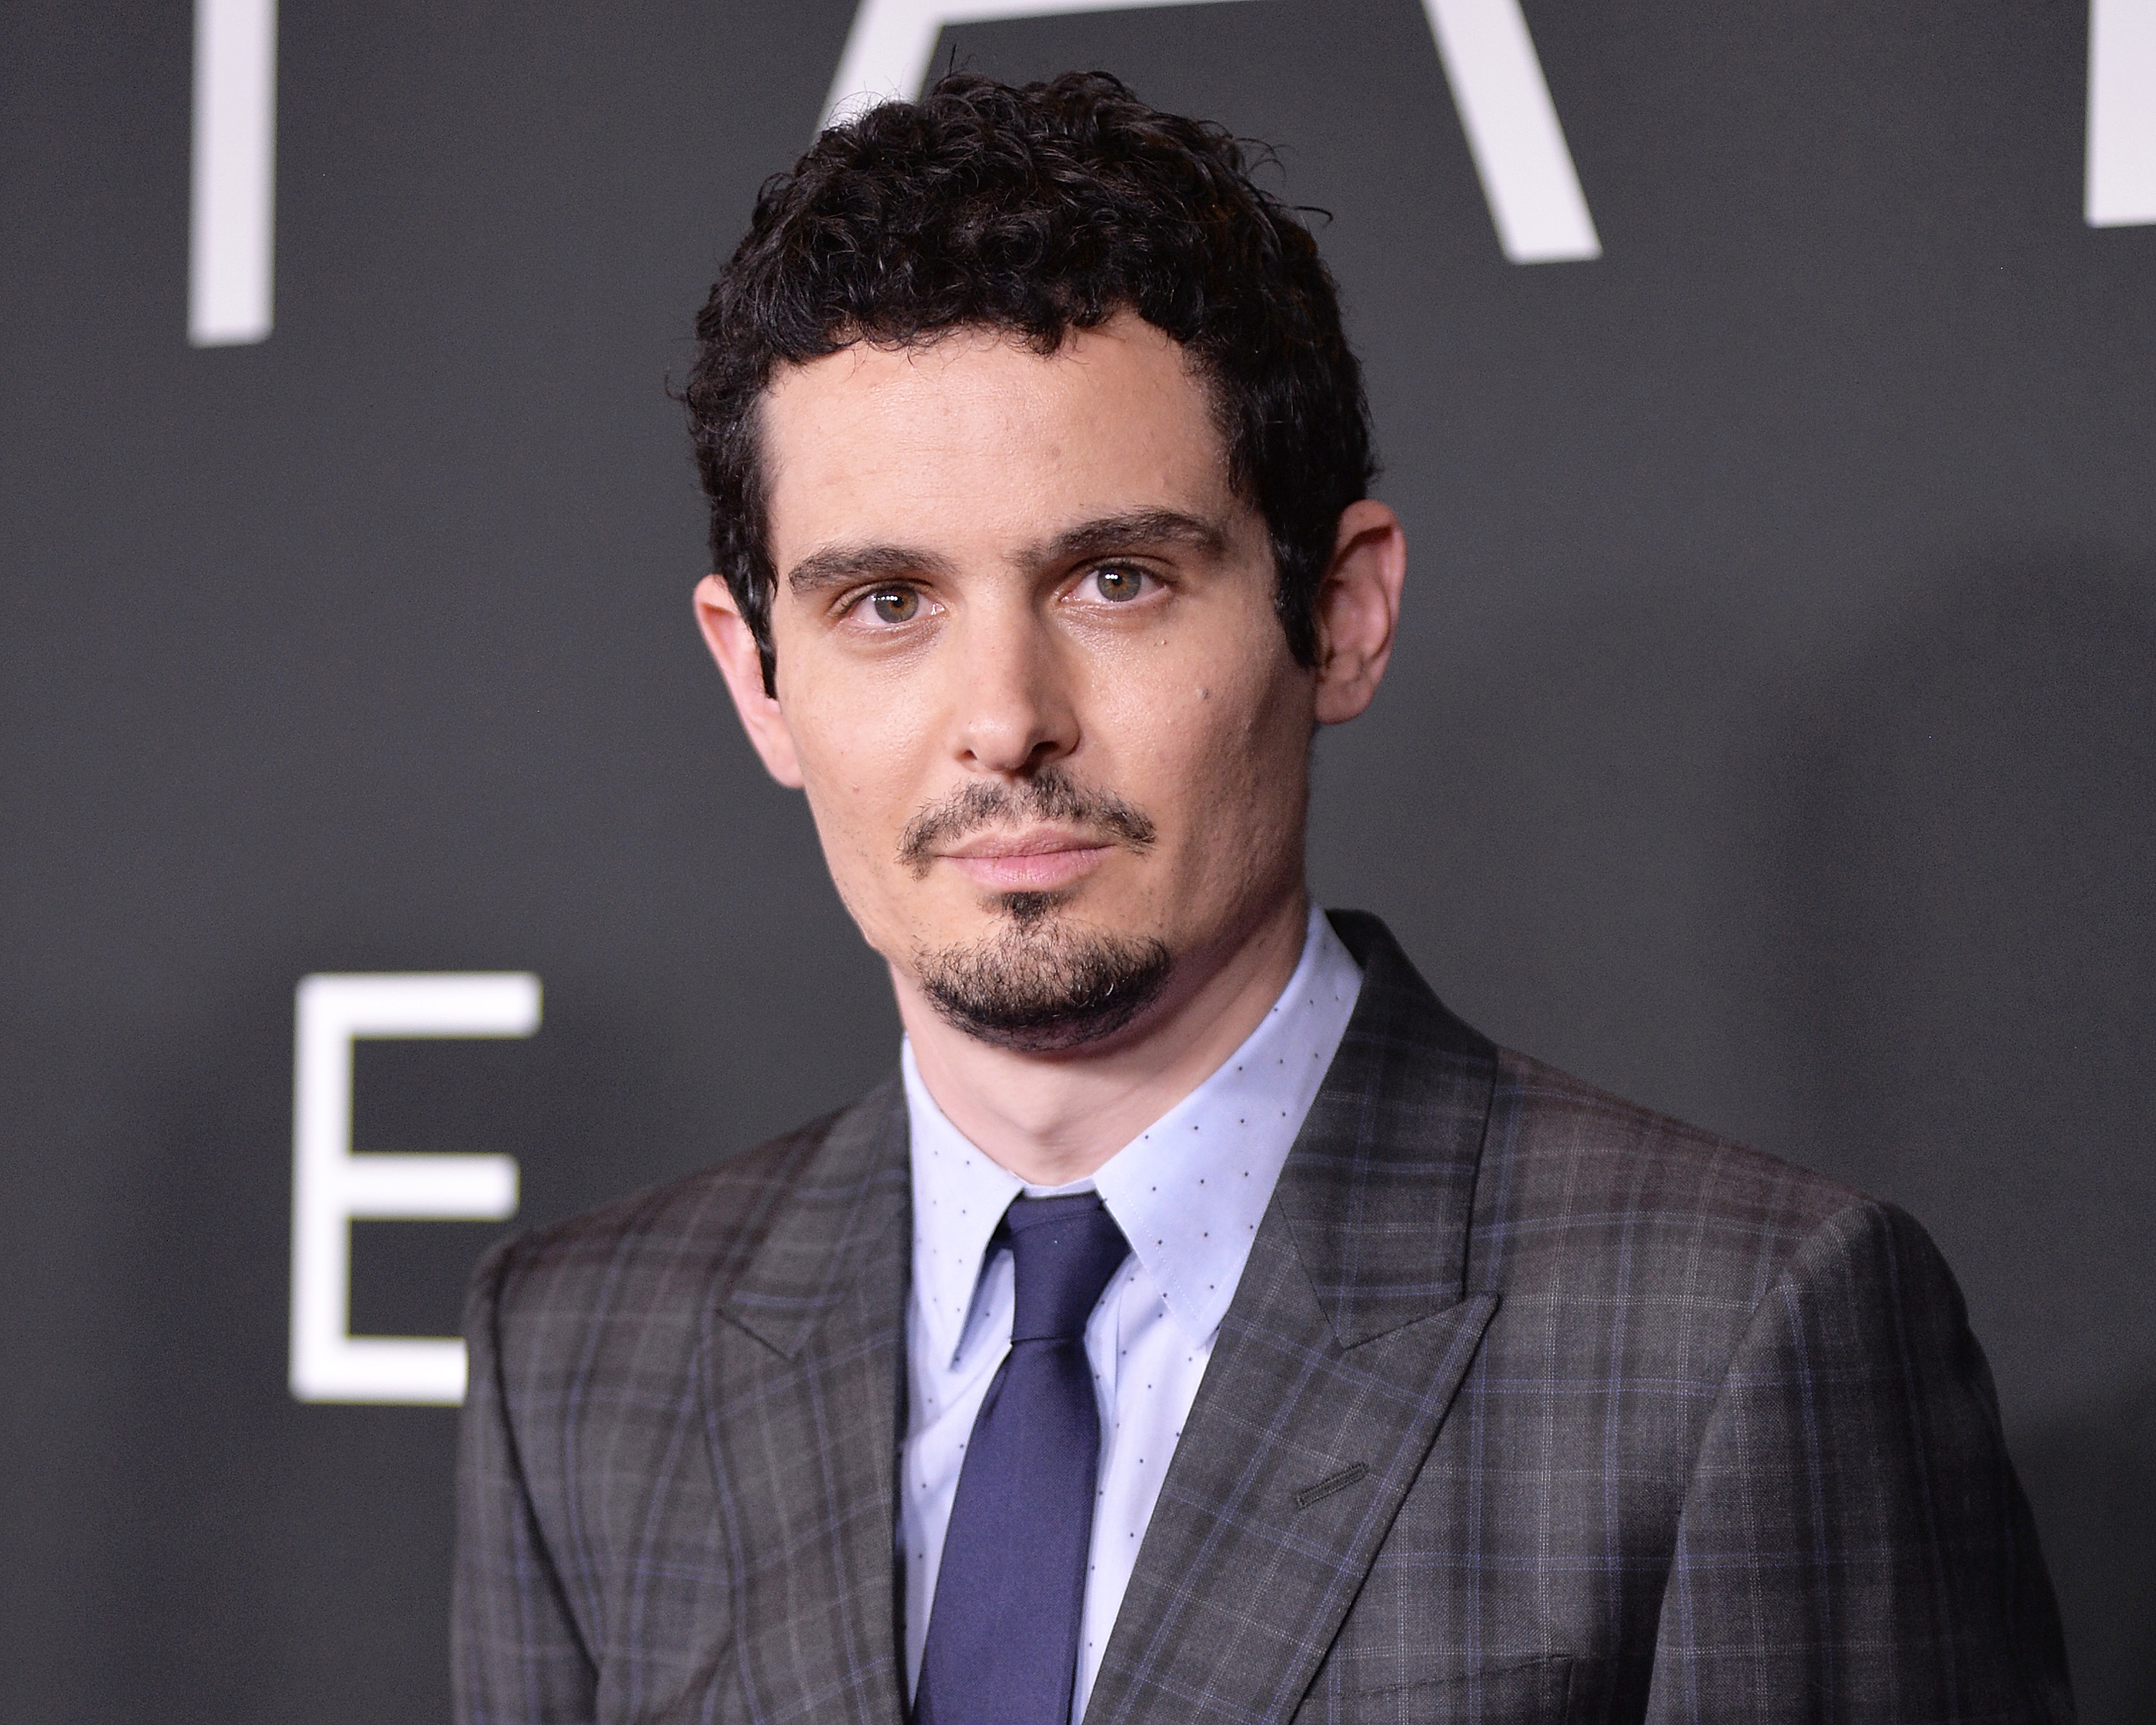 Damien Chazelle attends the "First Man" premiere on Oct. 4, 2018 in Washington, DC. (Getty Images—2018 Getty Images)